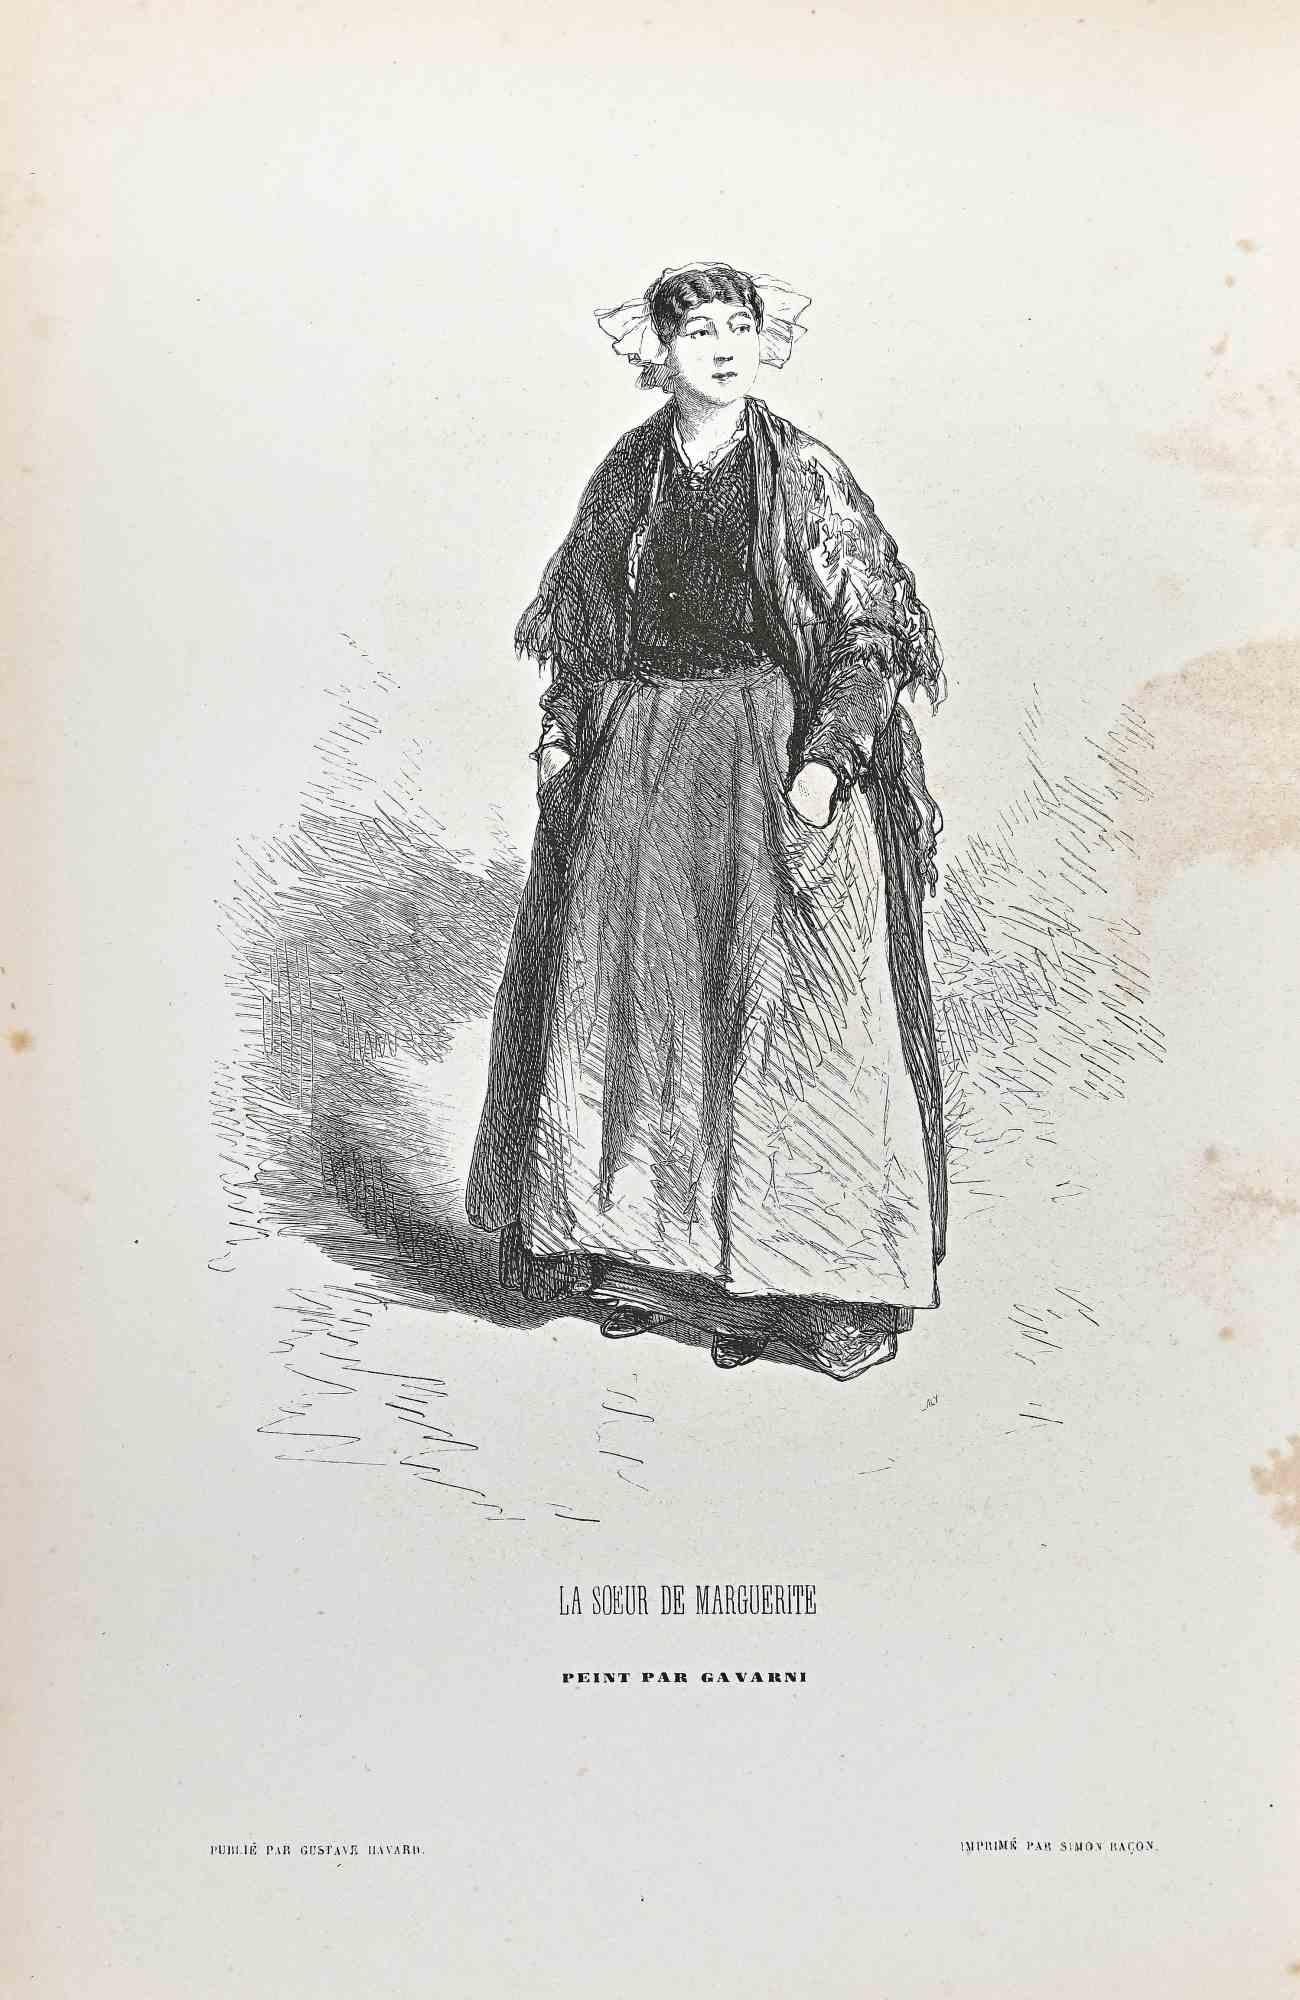 Le Soeur DDe Marguerite is a lithograph on ivory-colored paper, realized by the French draftsman Paul Gavarni (alias Guillaume Sulpice Chevalier Gavarni, 1804-1866) in the mid-19th Century.

Signed on the plate" Par Gavarni".

From series of